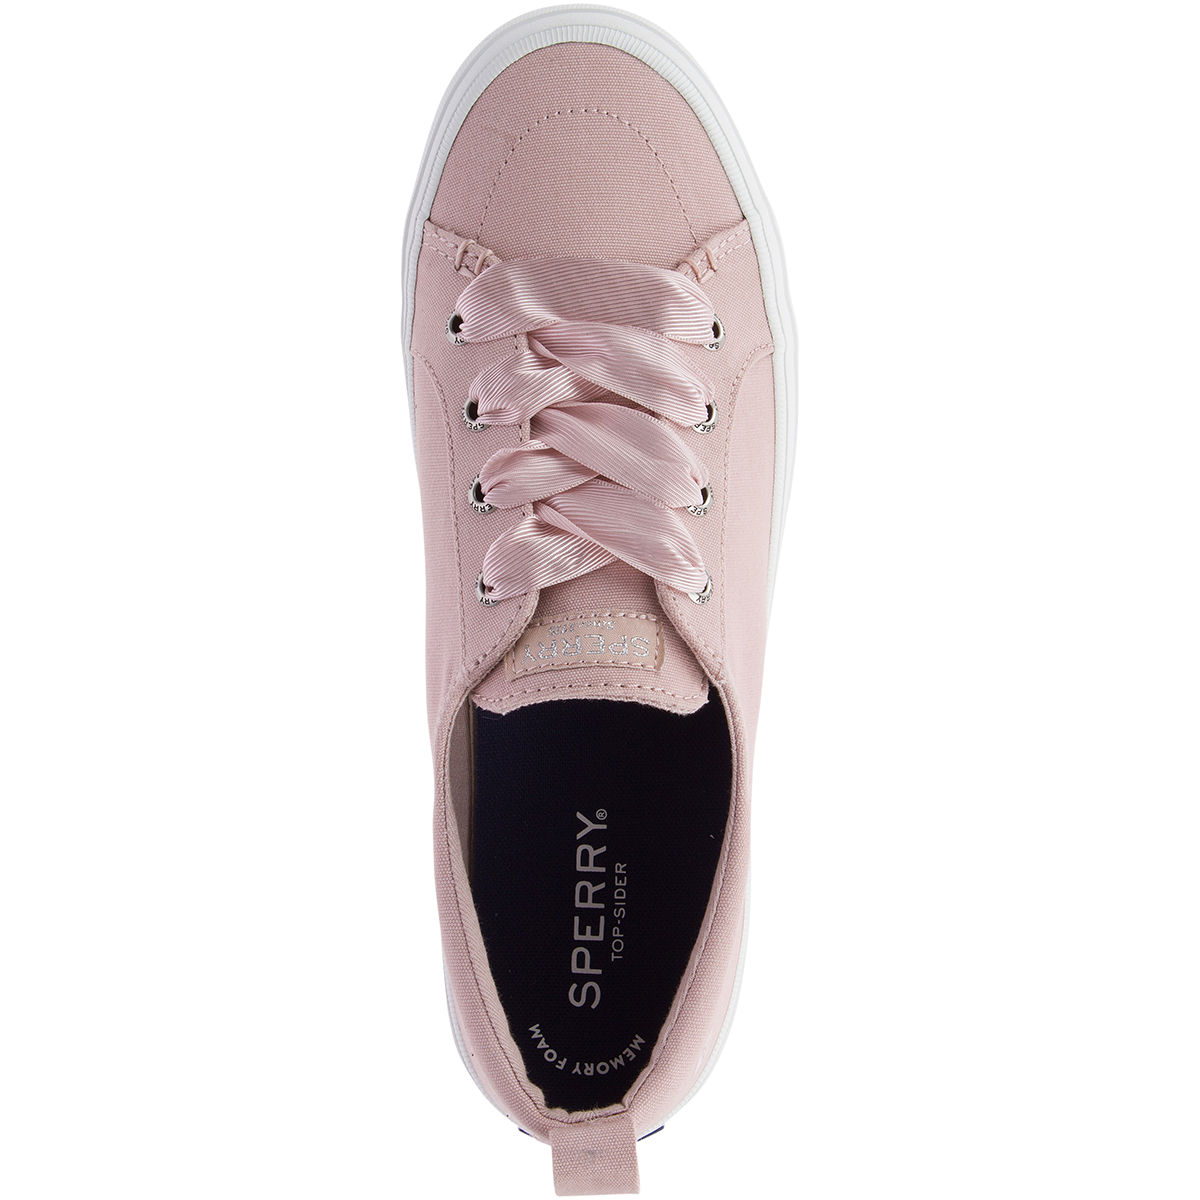 sperry satin lace sneaker